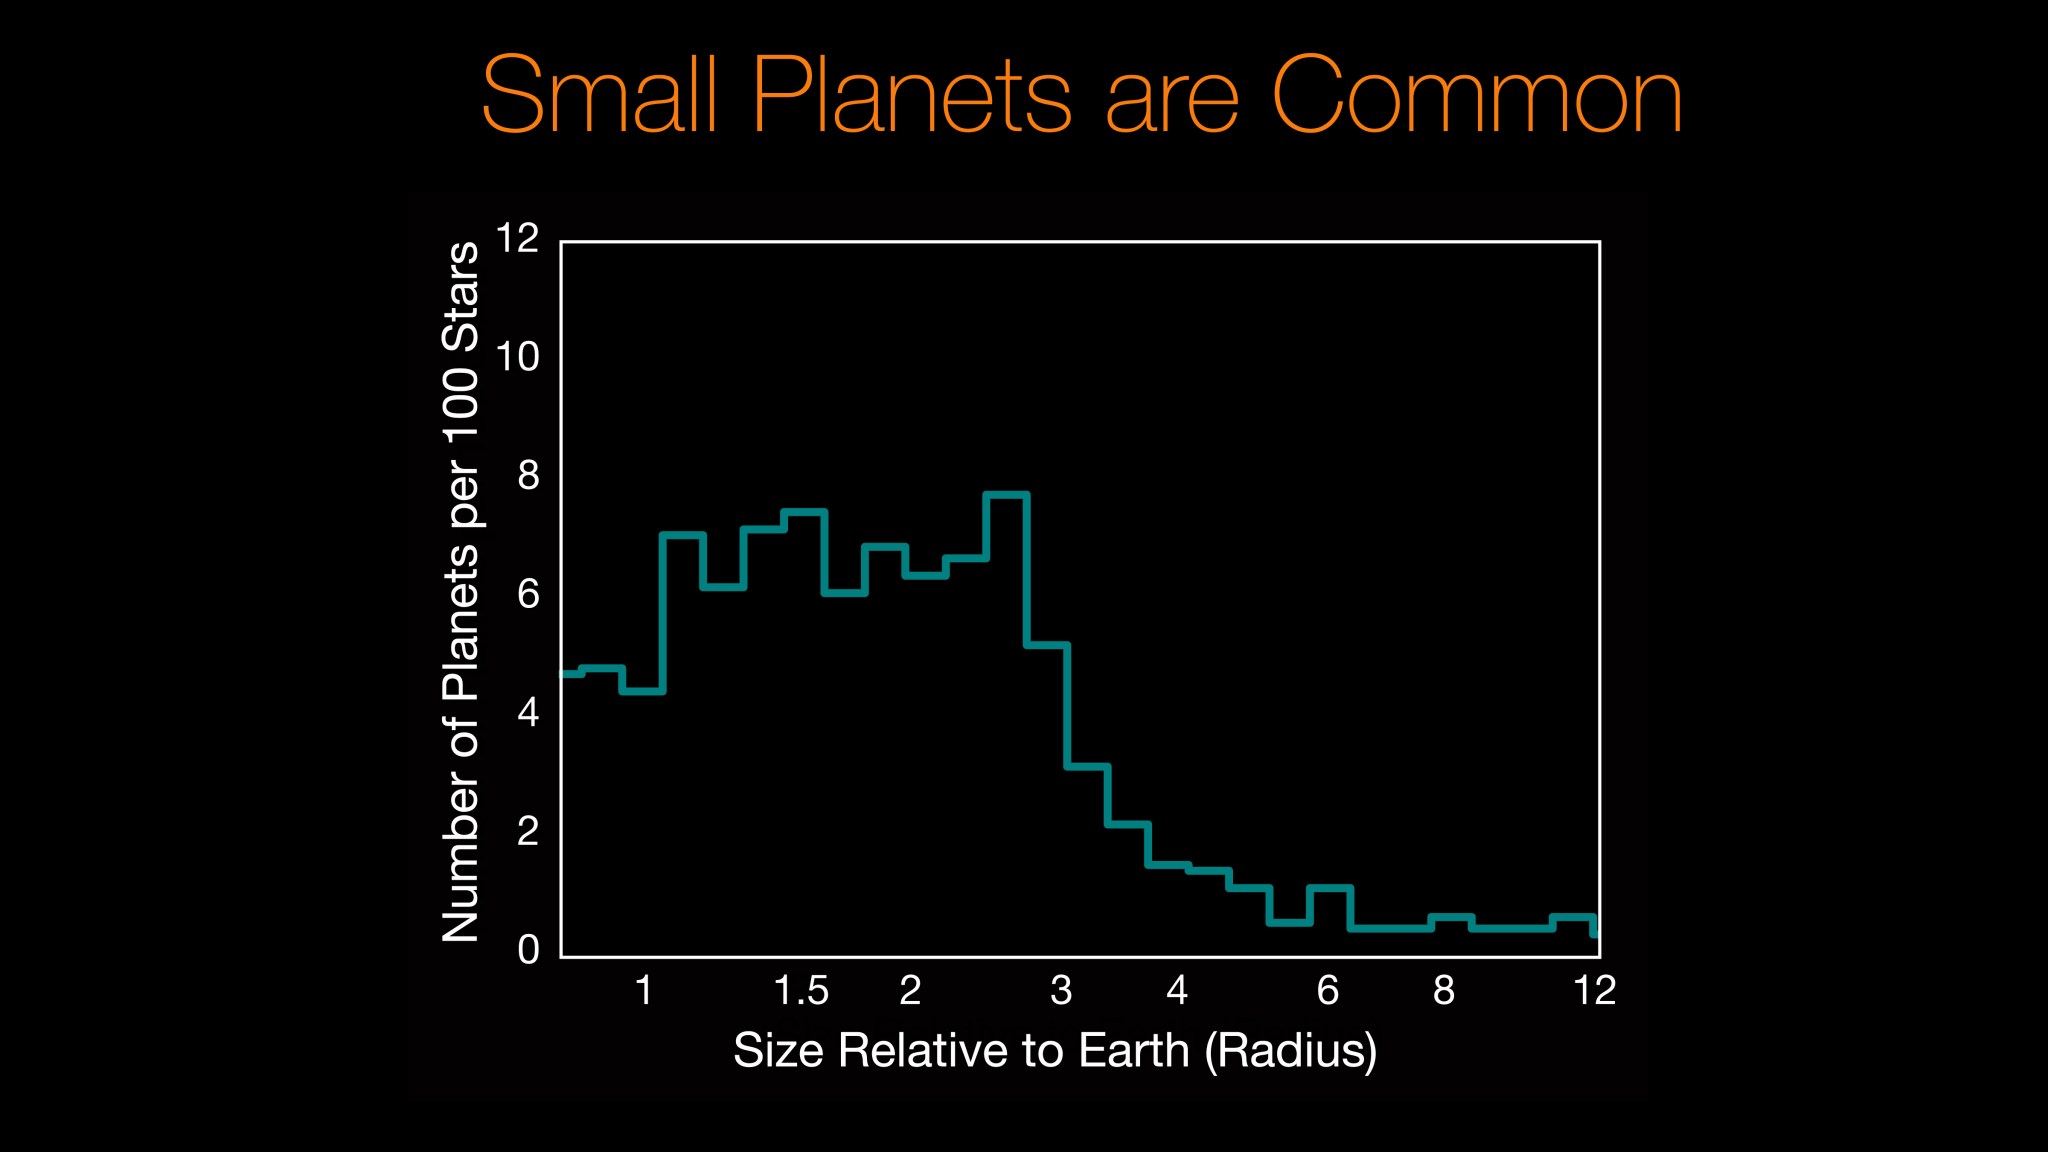 Small Planets are Common